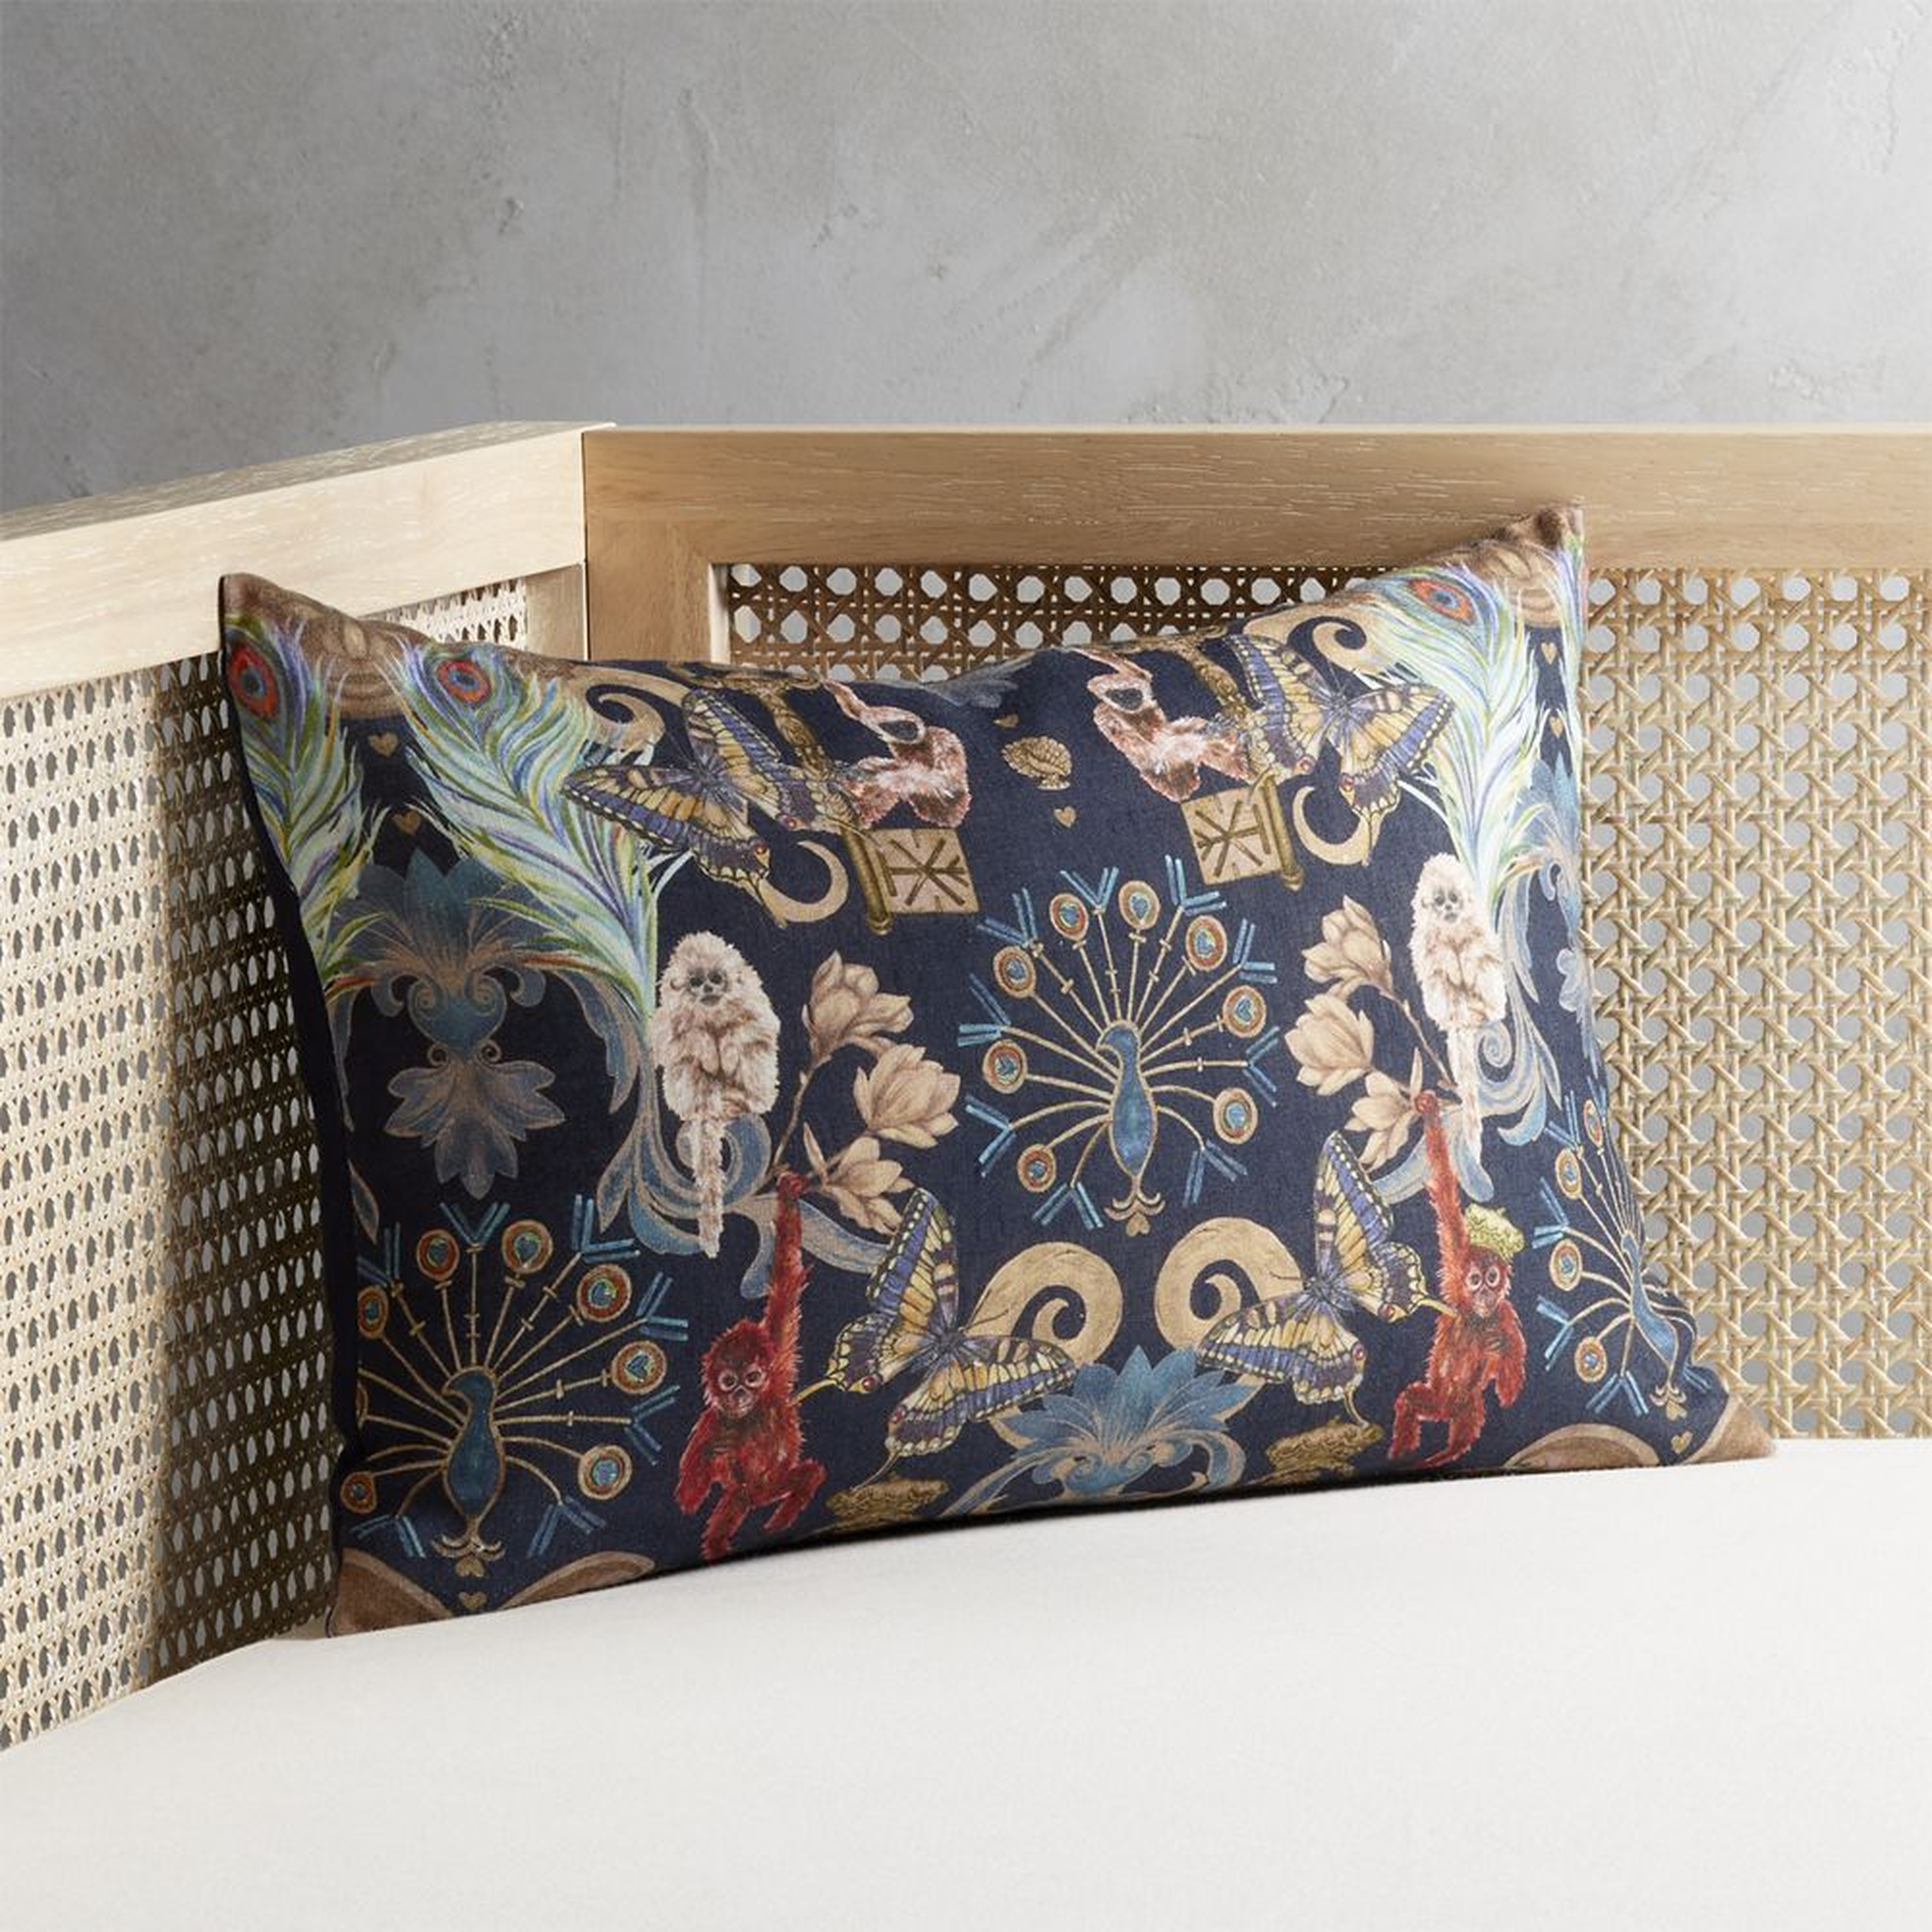 "18""x12"" Regal Monkeys Pillow with Feather-Down Insert" - CB2